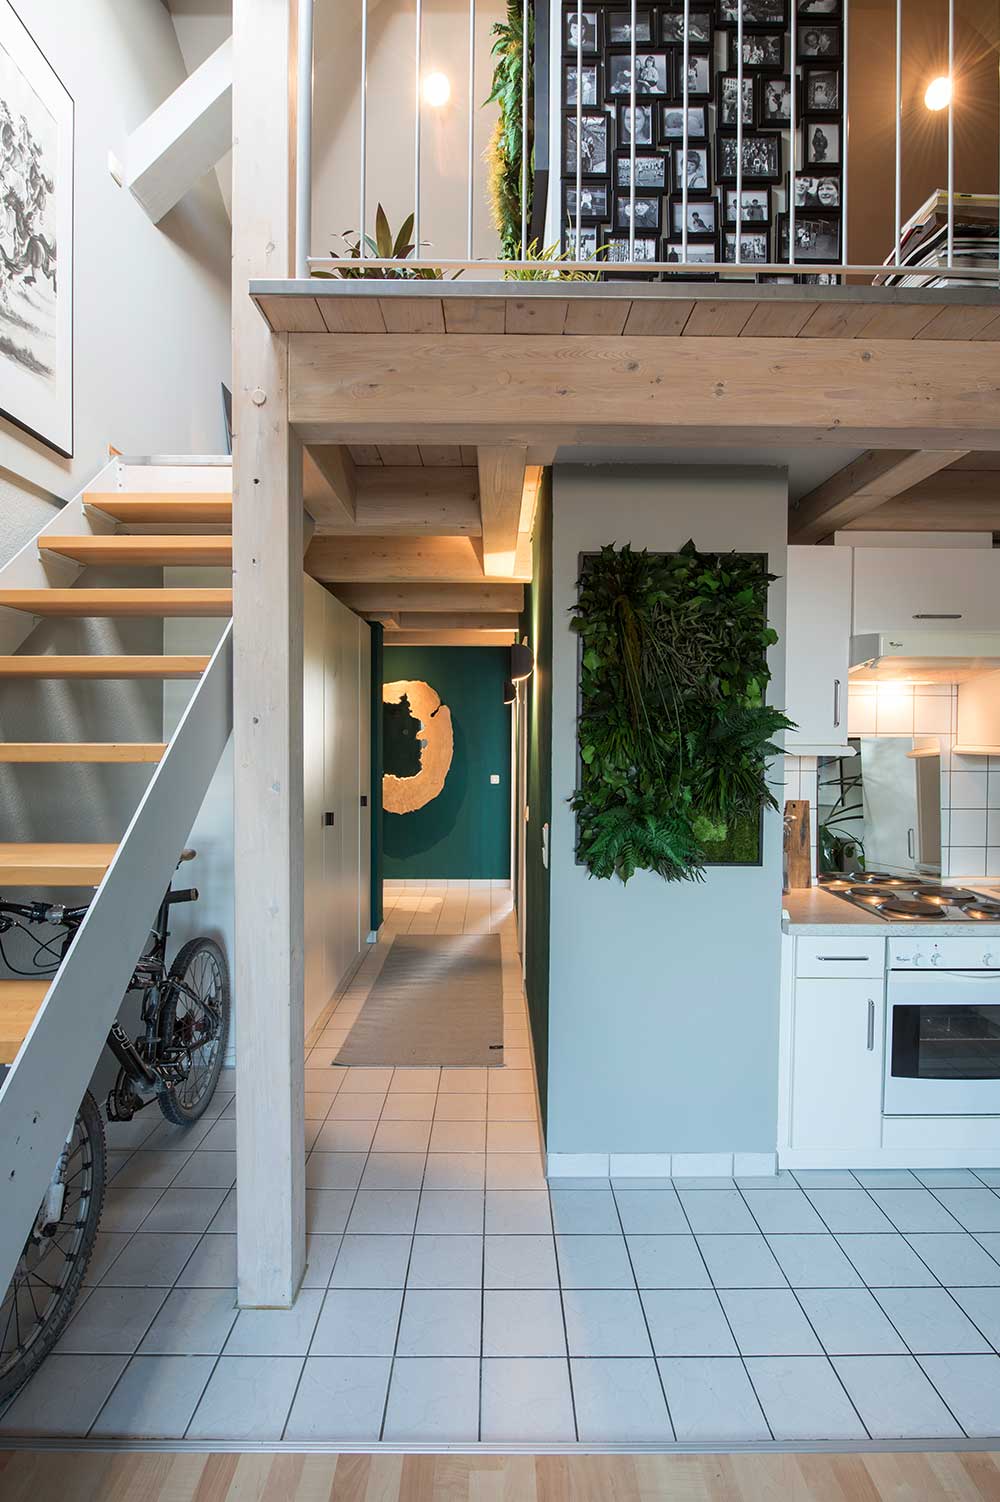 house with a wall next to the kitchen having a frame of greenery hanging from it